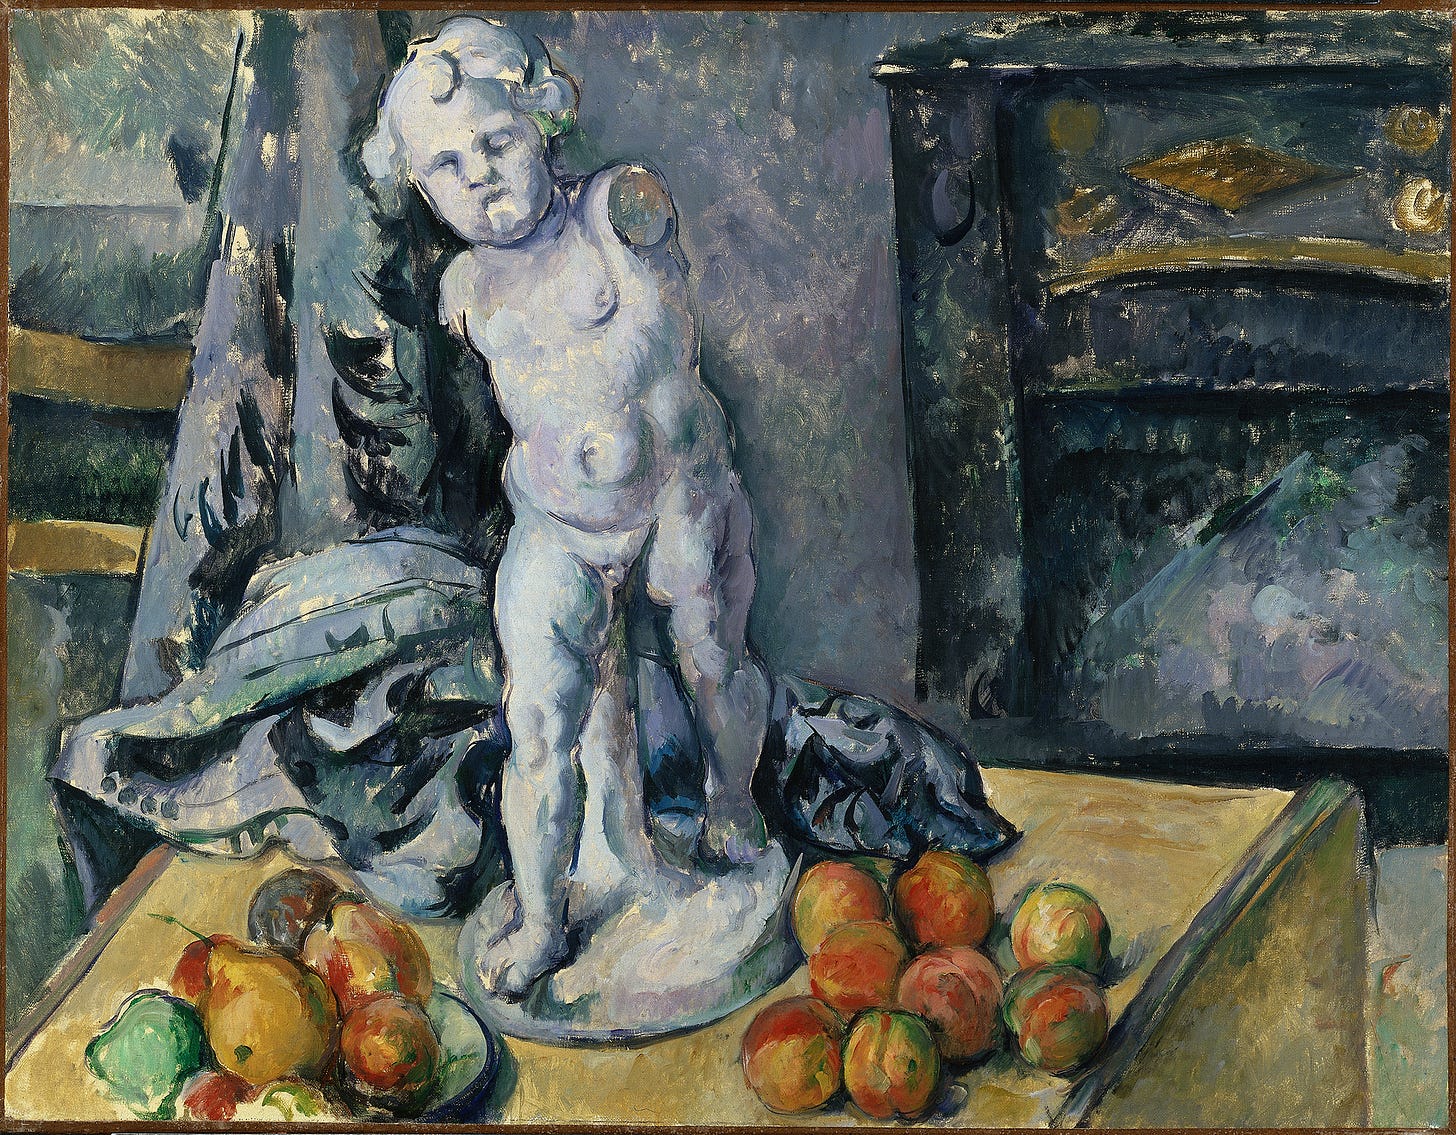 Still Life with Statuette (1890s) by Paul Cézanne